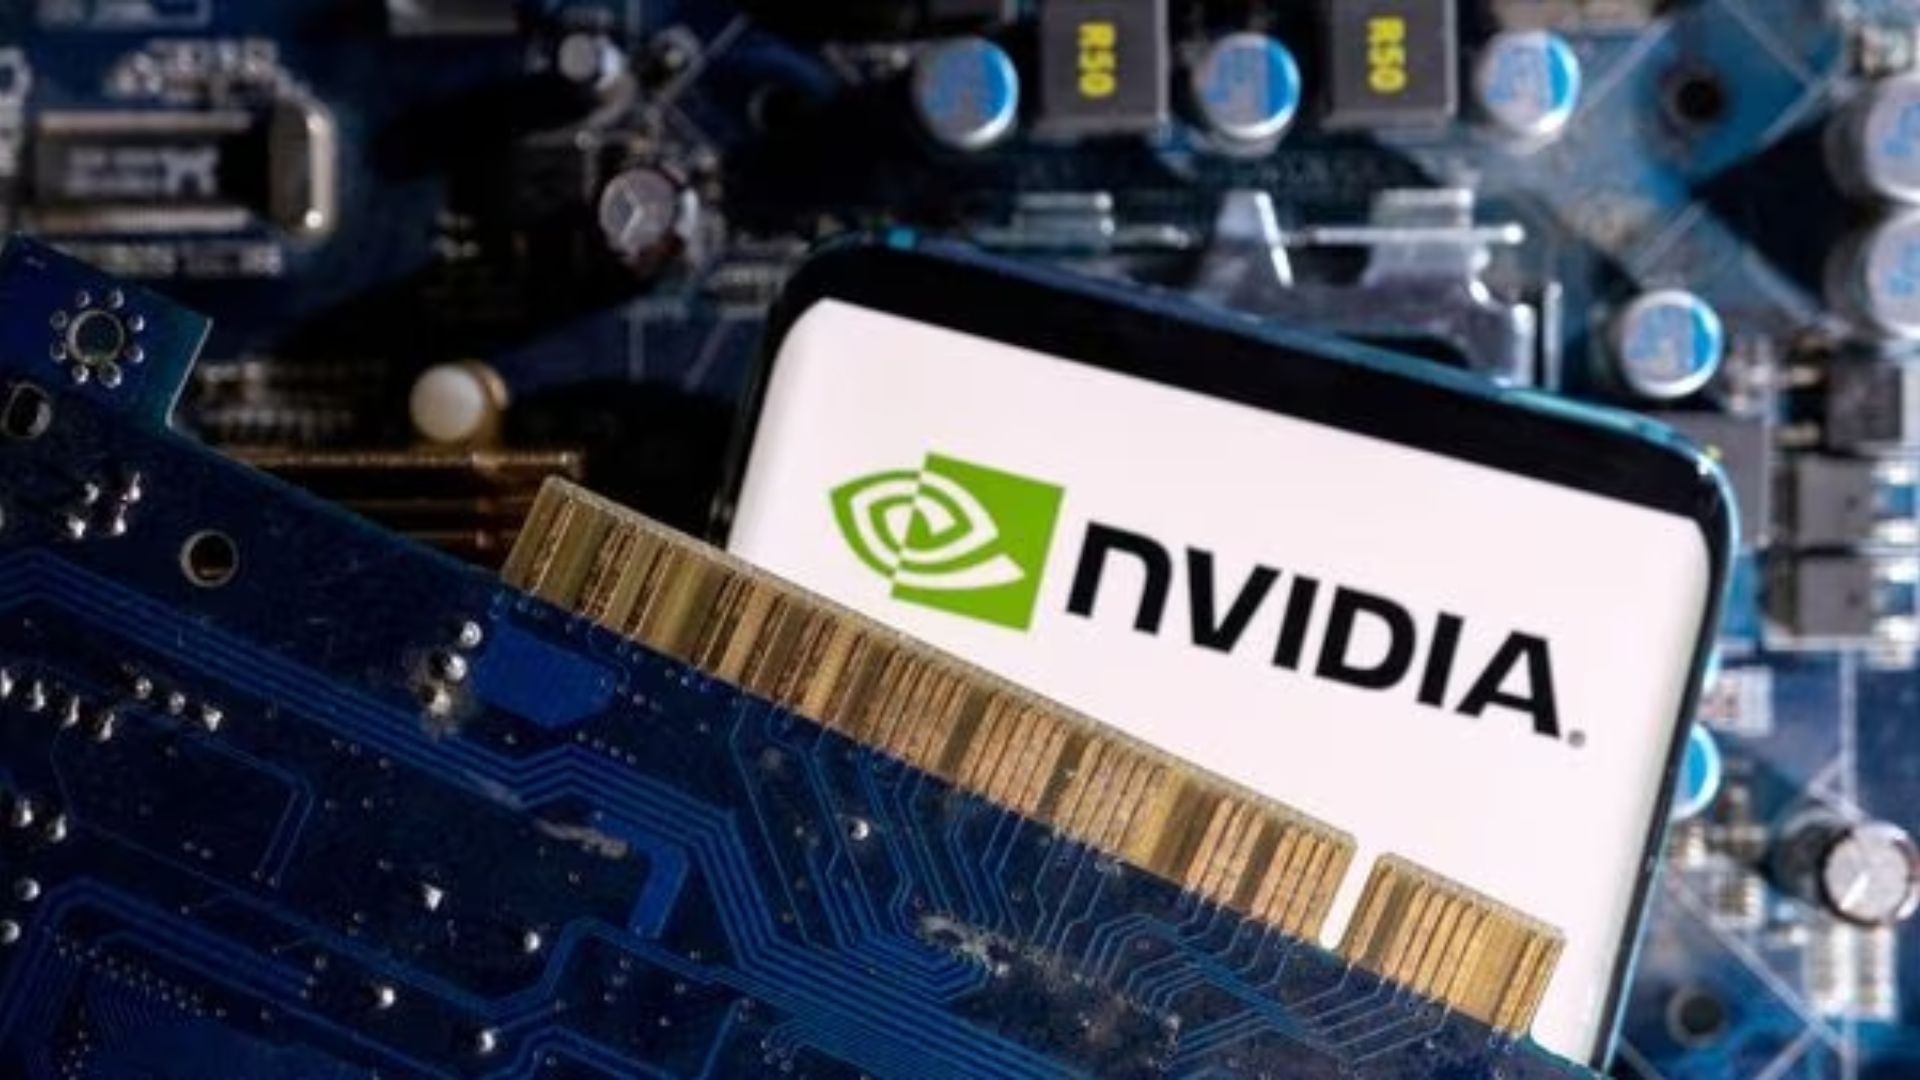 Nvidia delays launch of new AI chip in China amid US export rules